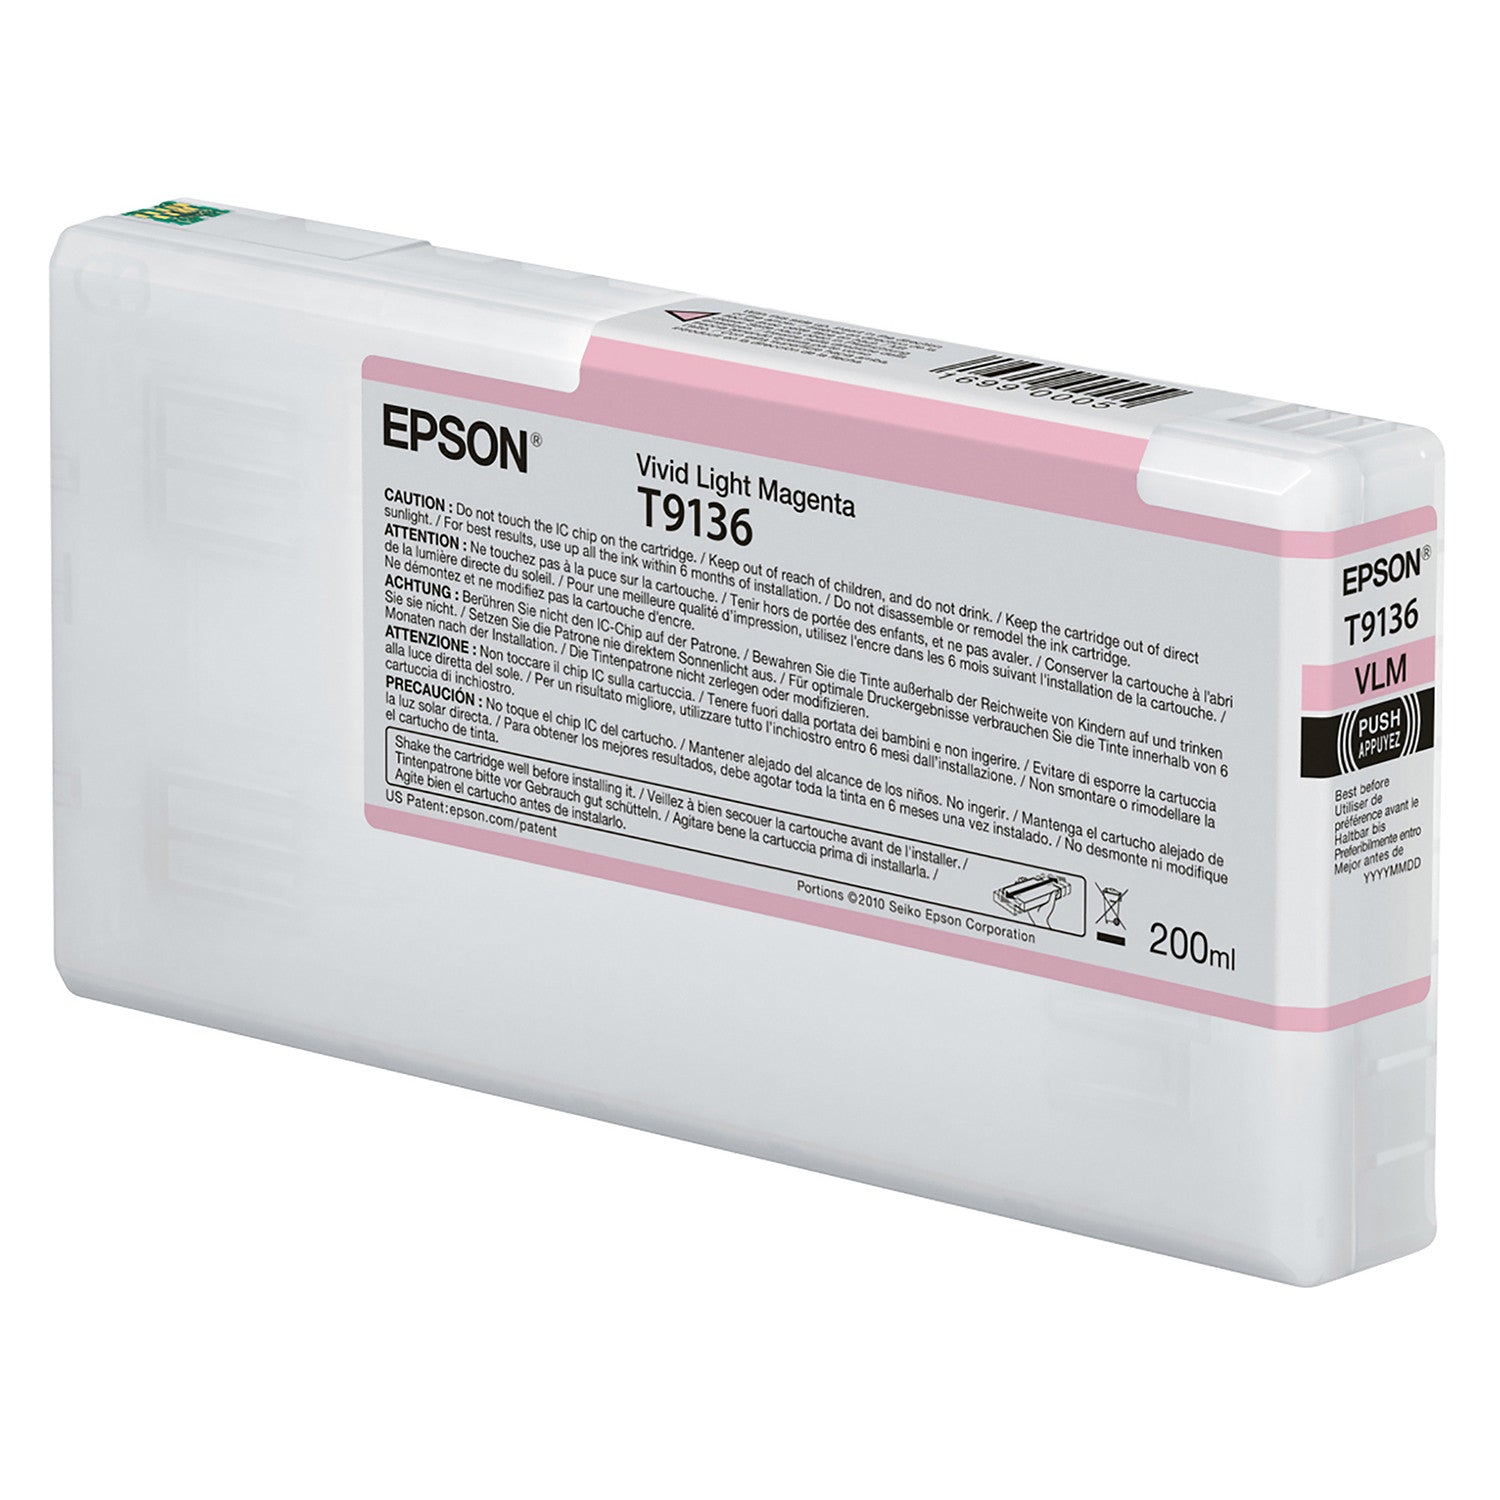 Epson T913600 P5000 Ultrachrome HD Ink 200ml Light Magenta, papers printer ink, Epson - Pictureline 